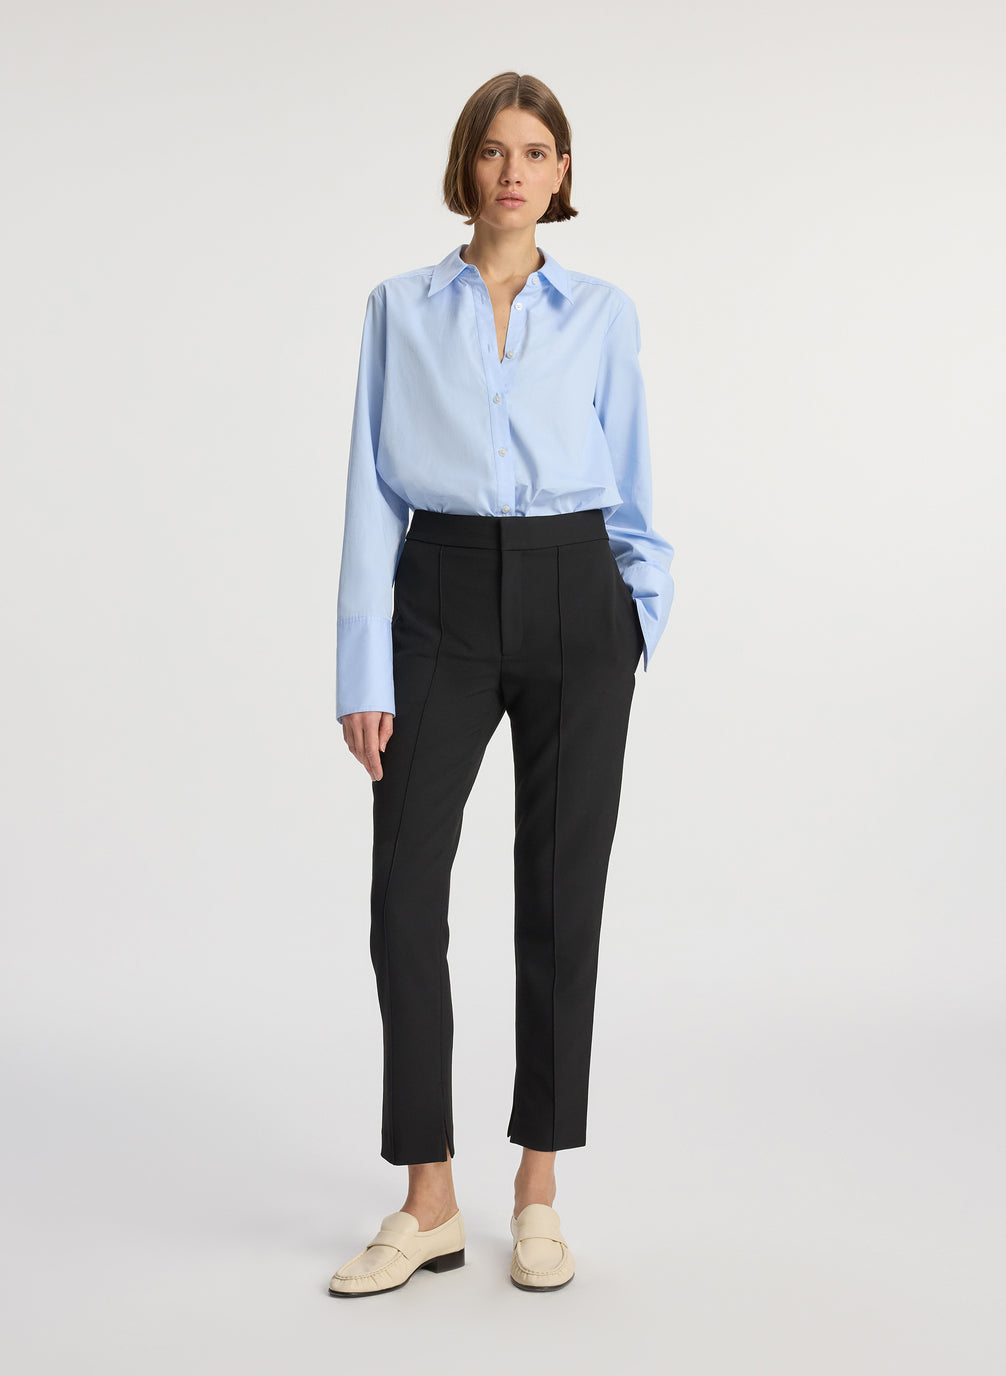 front view of woman wearing light blue button down collared shirt and black ankle length pants